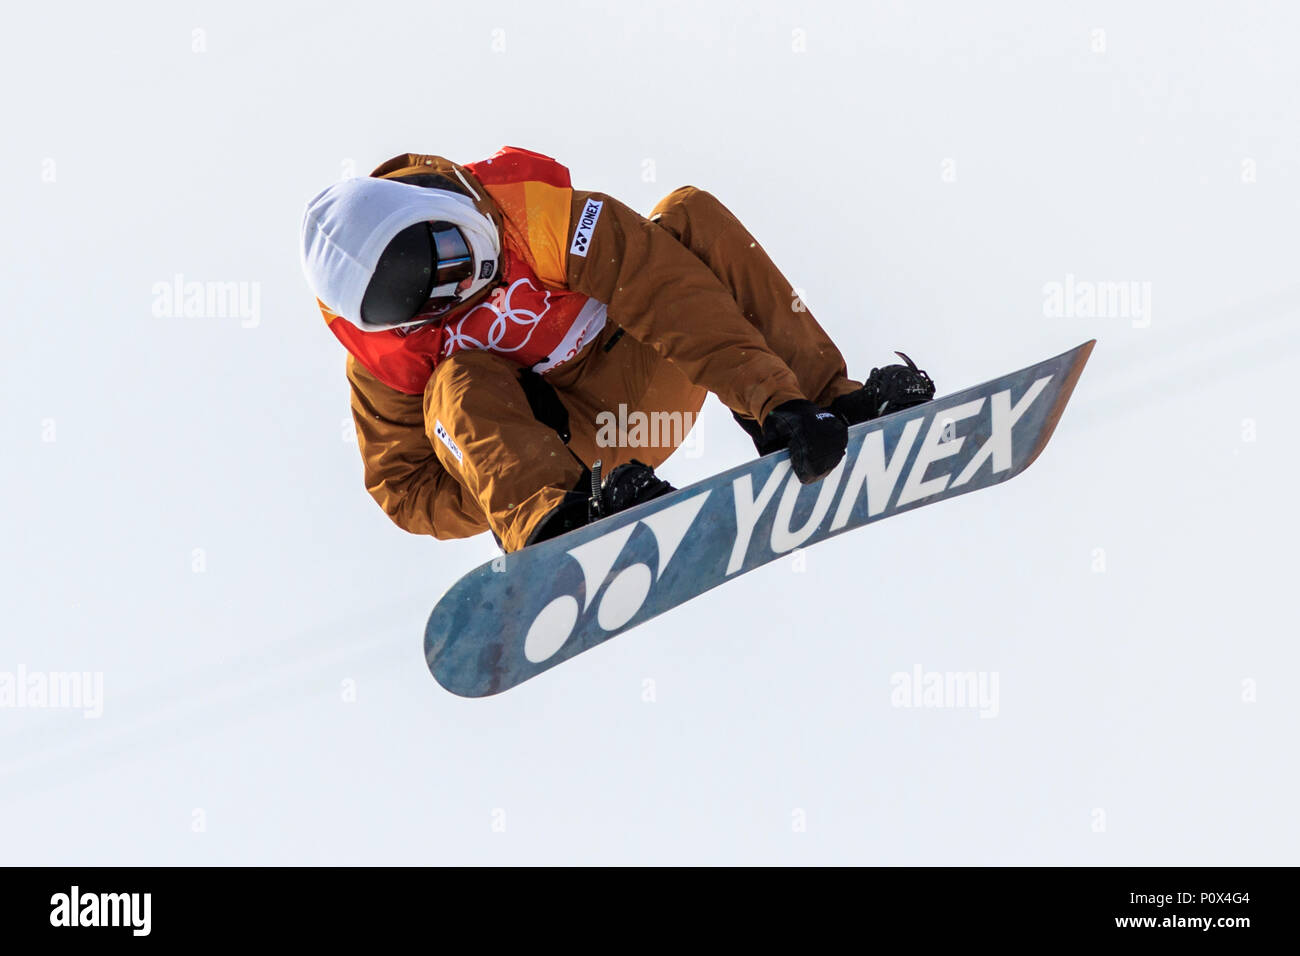 Tim-Kevin Ravhjak (SLO) competing in  the Men's Snowboarding Half Pipe Qualification at the Olympic Winter Games PyeongChang 2018 Stock Photo